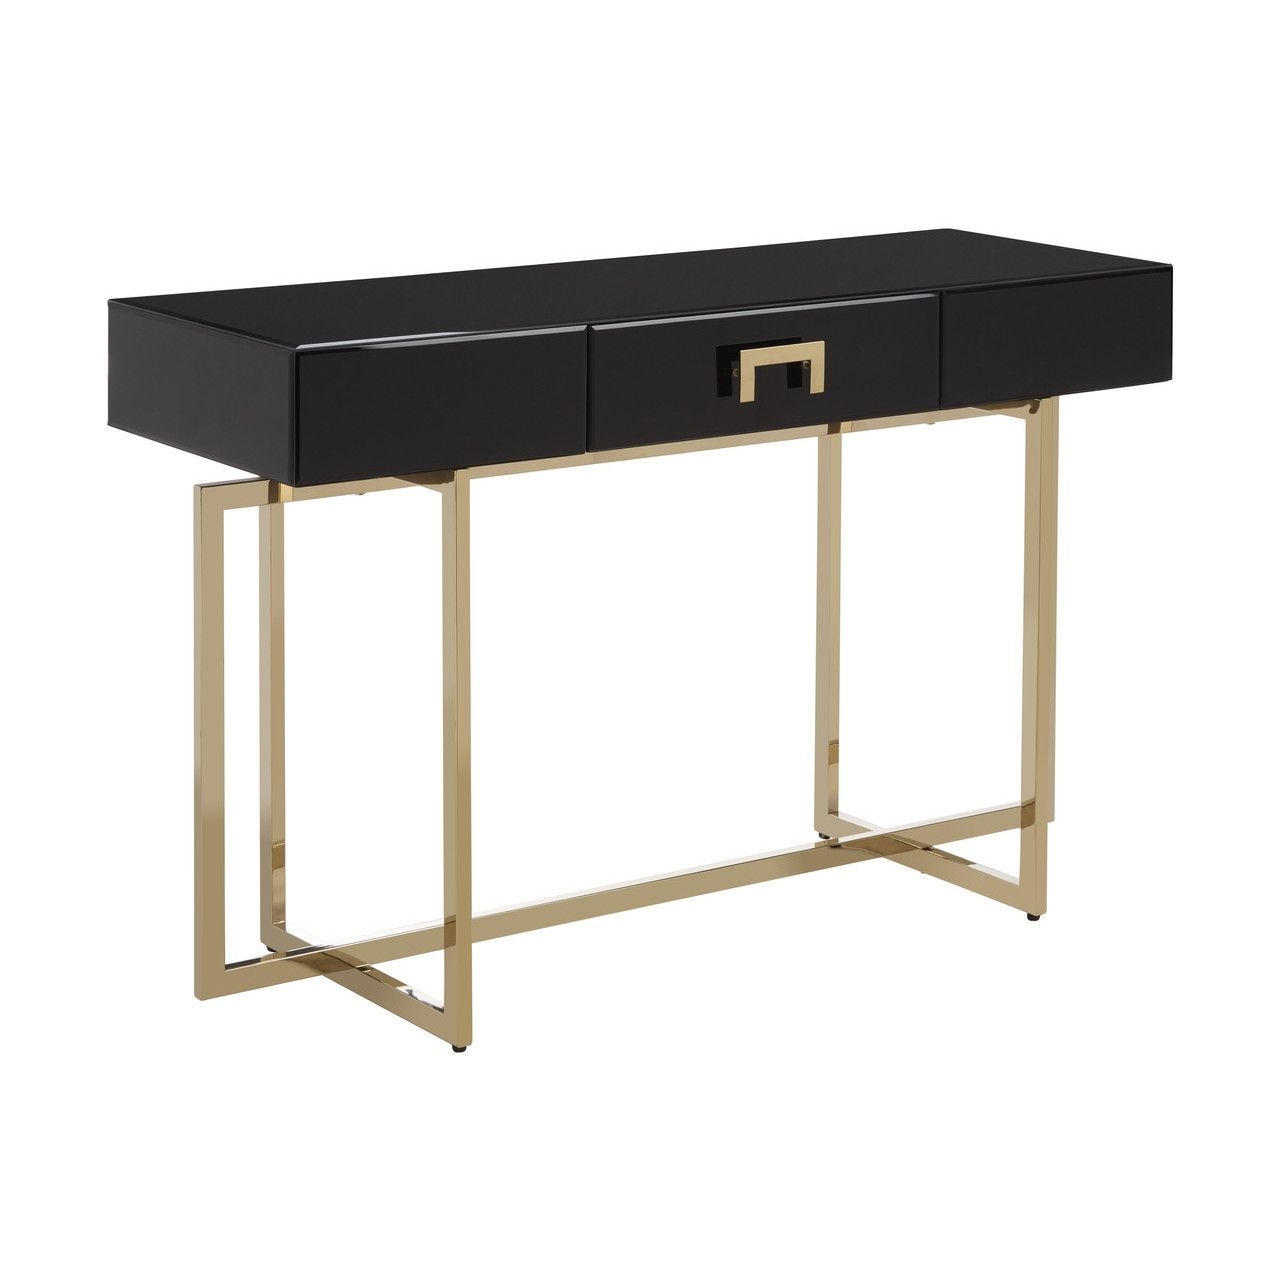 Ragusa Glass Top Wooden Console Table With 1 Drawer In Black